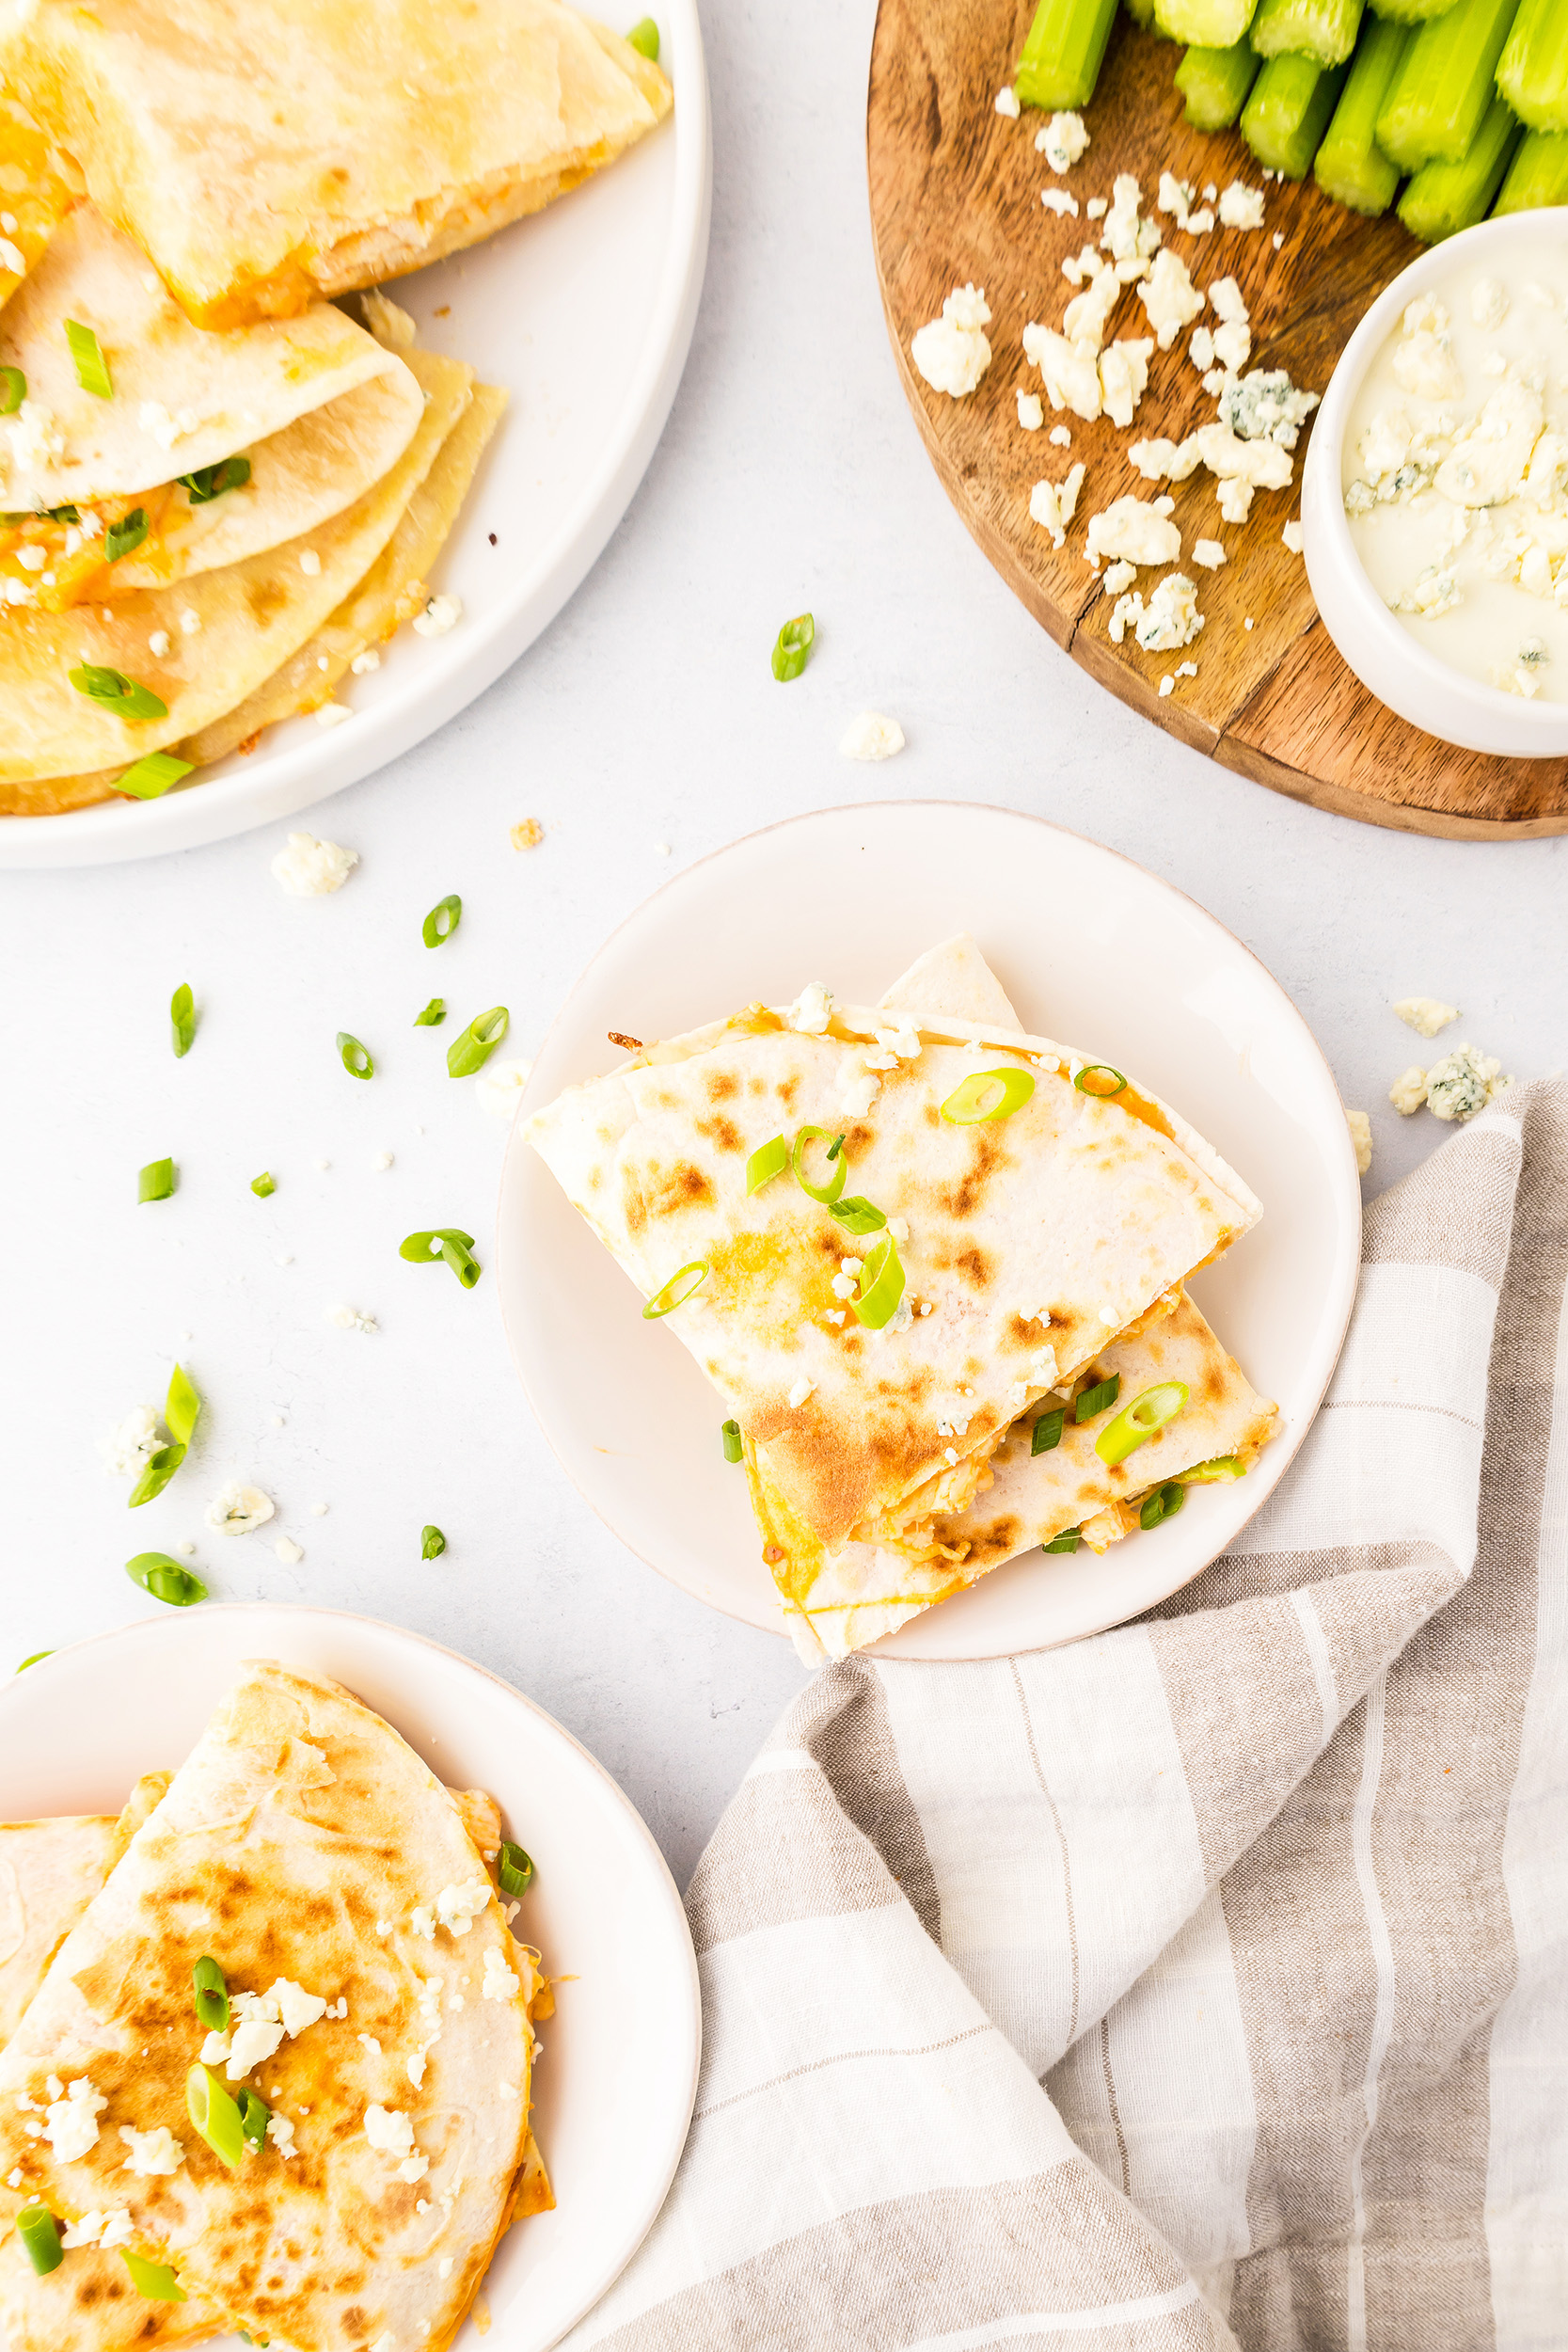 buffalo chicken quesadilla spread complete with dipping sauce and celery